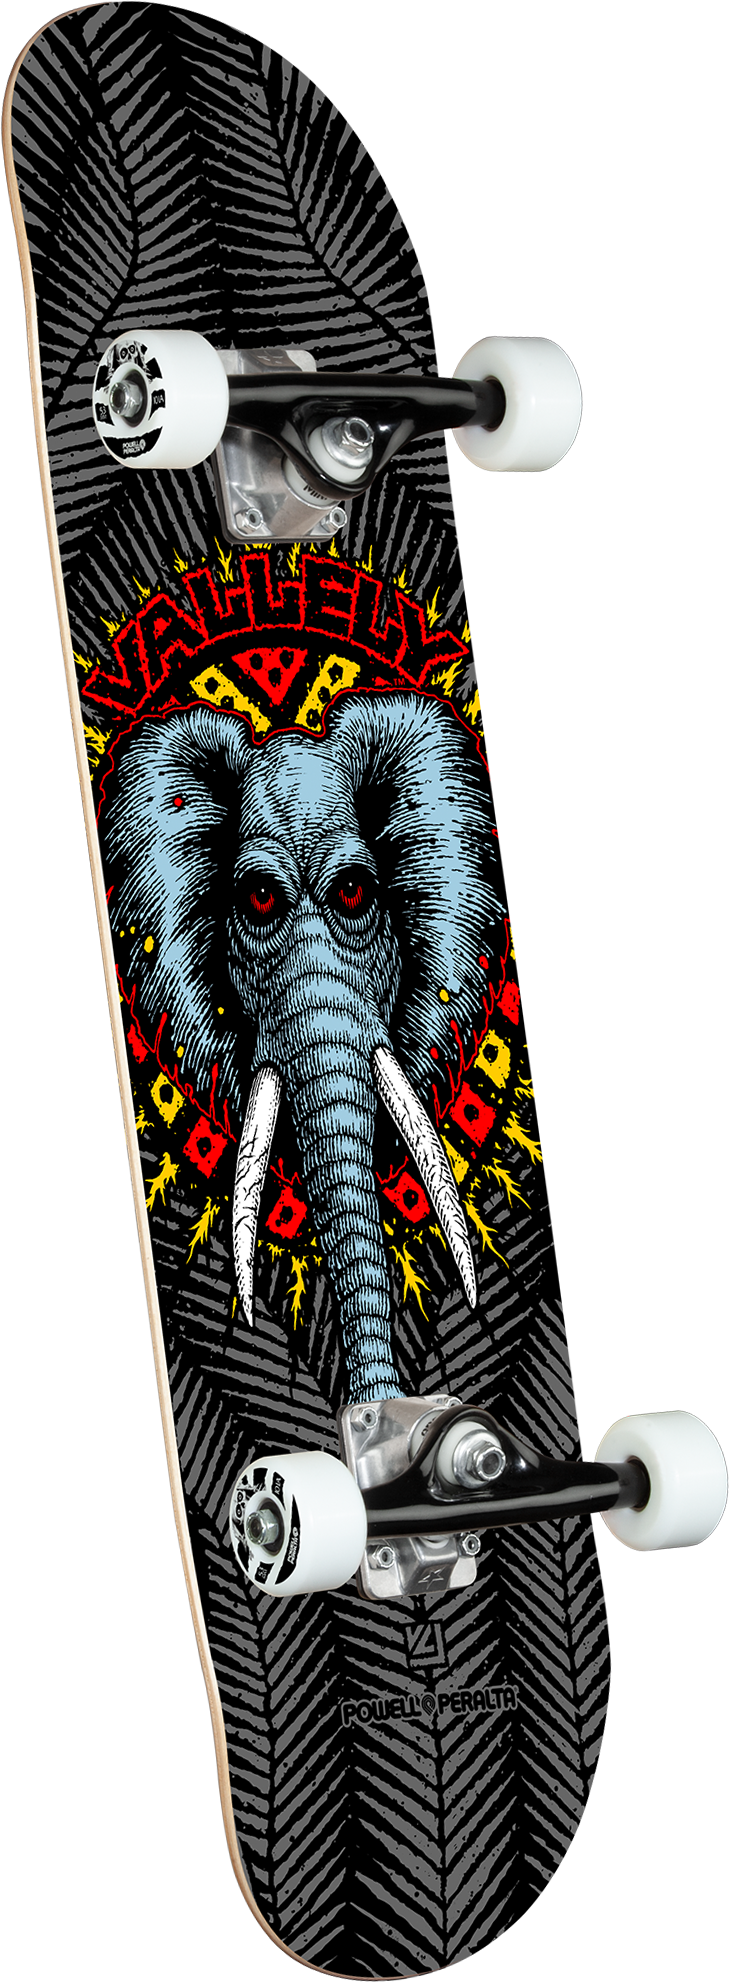 POWELL PERALTA VALLELY ELEPHANT COMPLETE GREY (8&quot;)